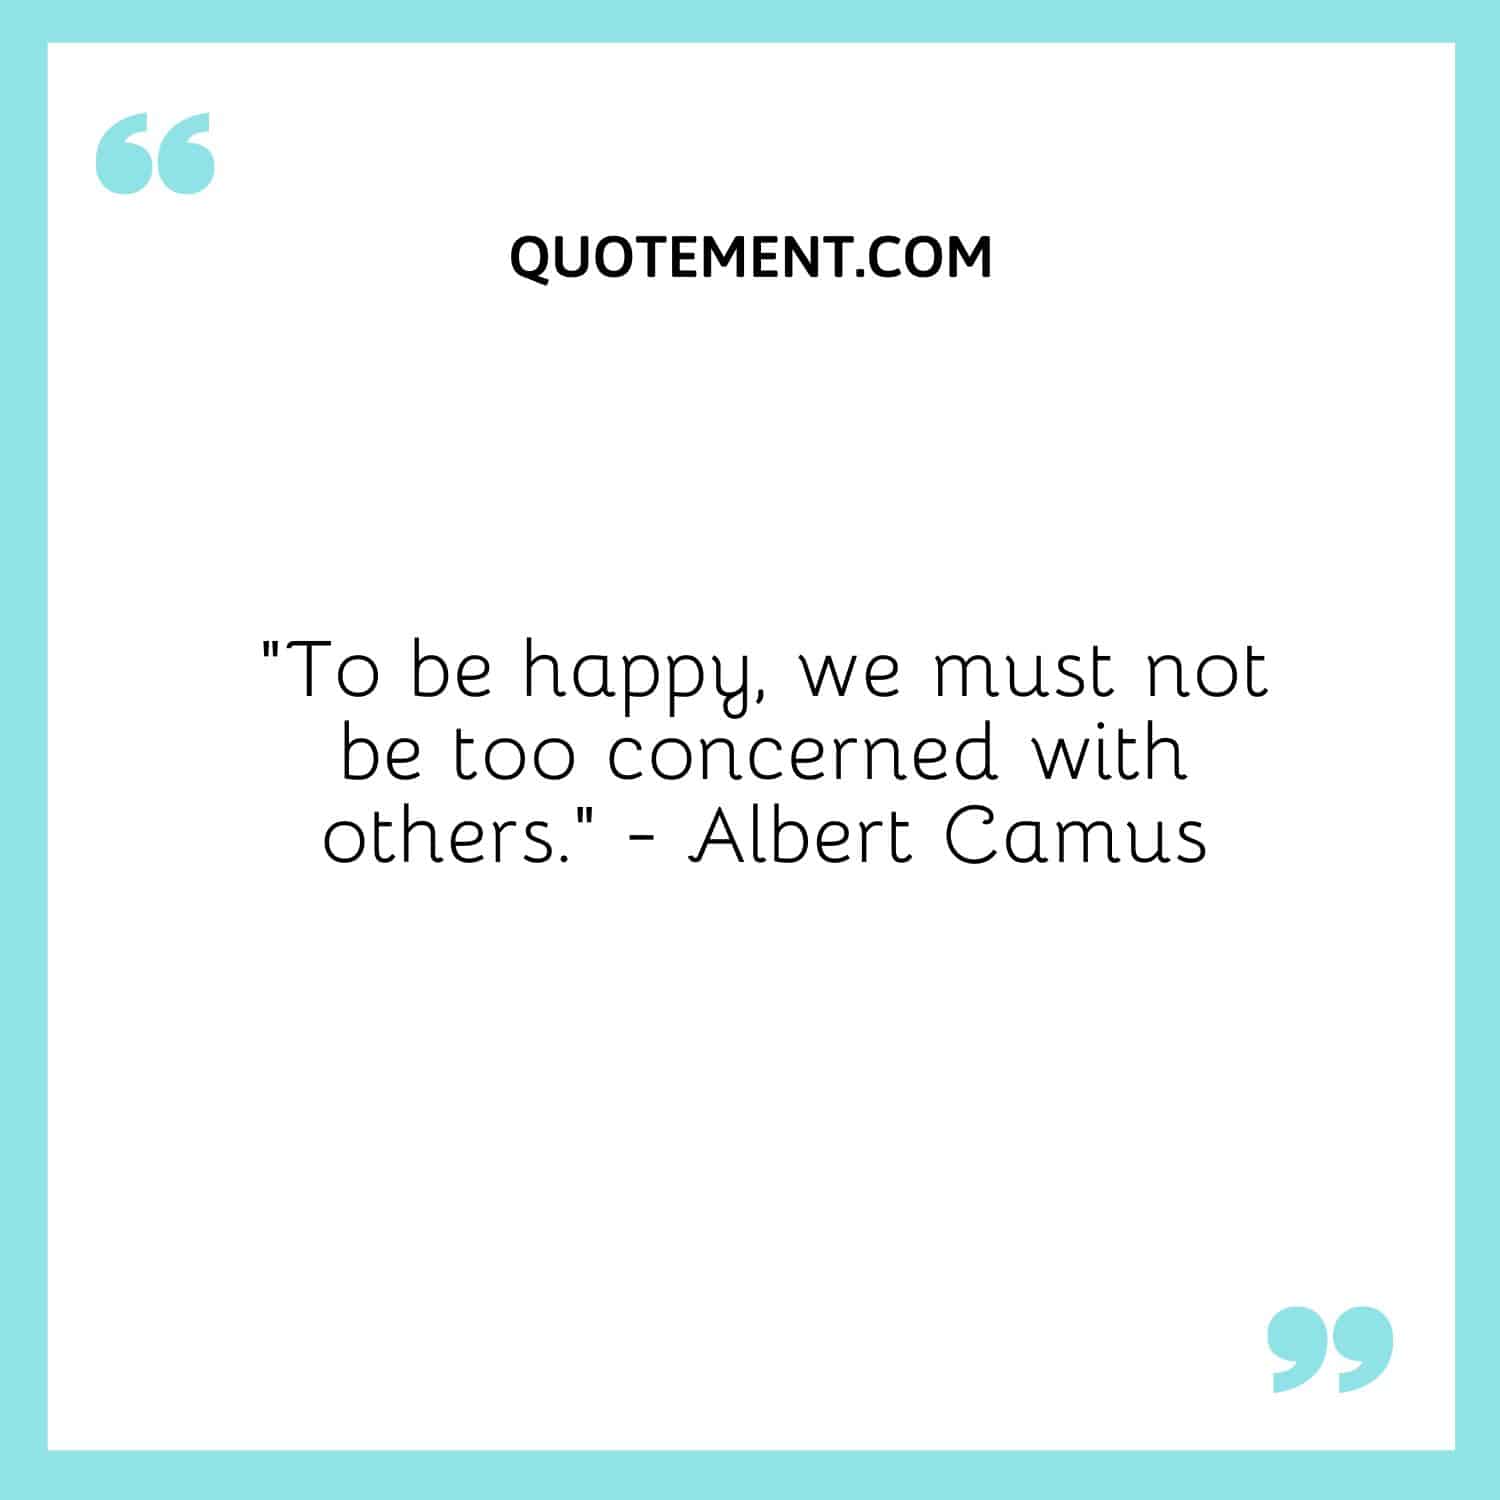 To be happy, we must not be too concerned with others